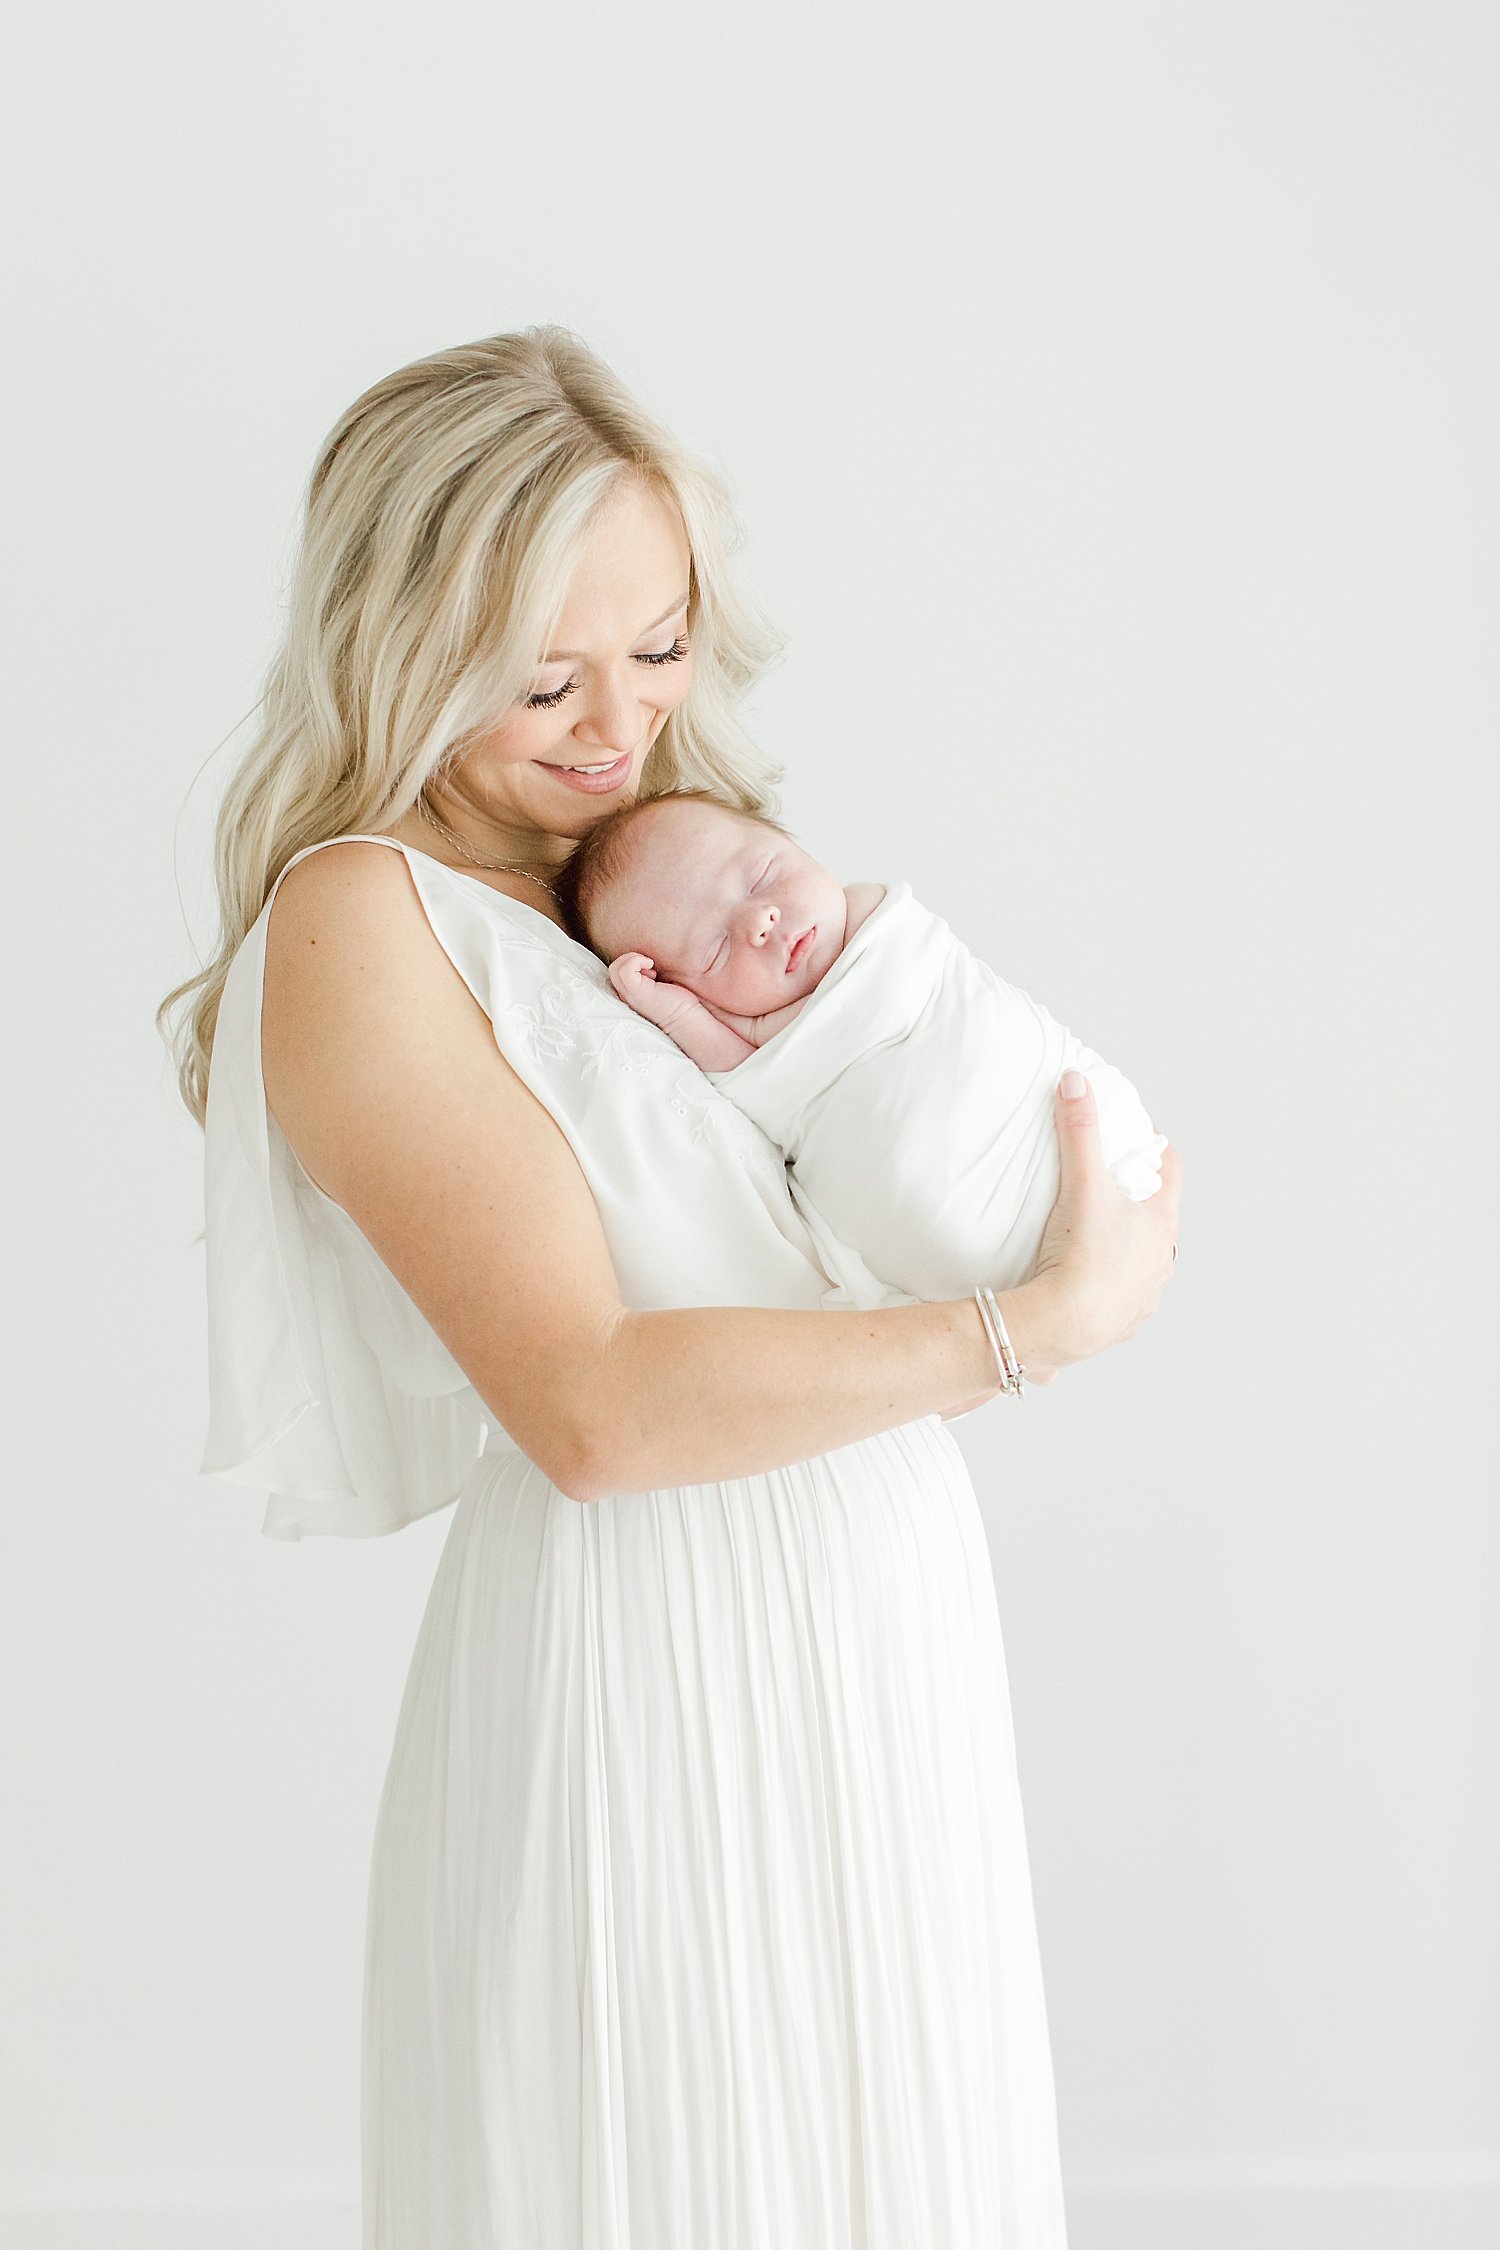 Studio newborn session with Fairfield County, CT Photographer, Kristin Wood Photography.